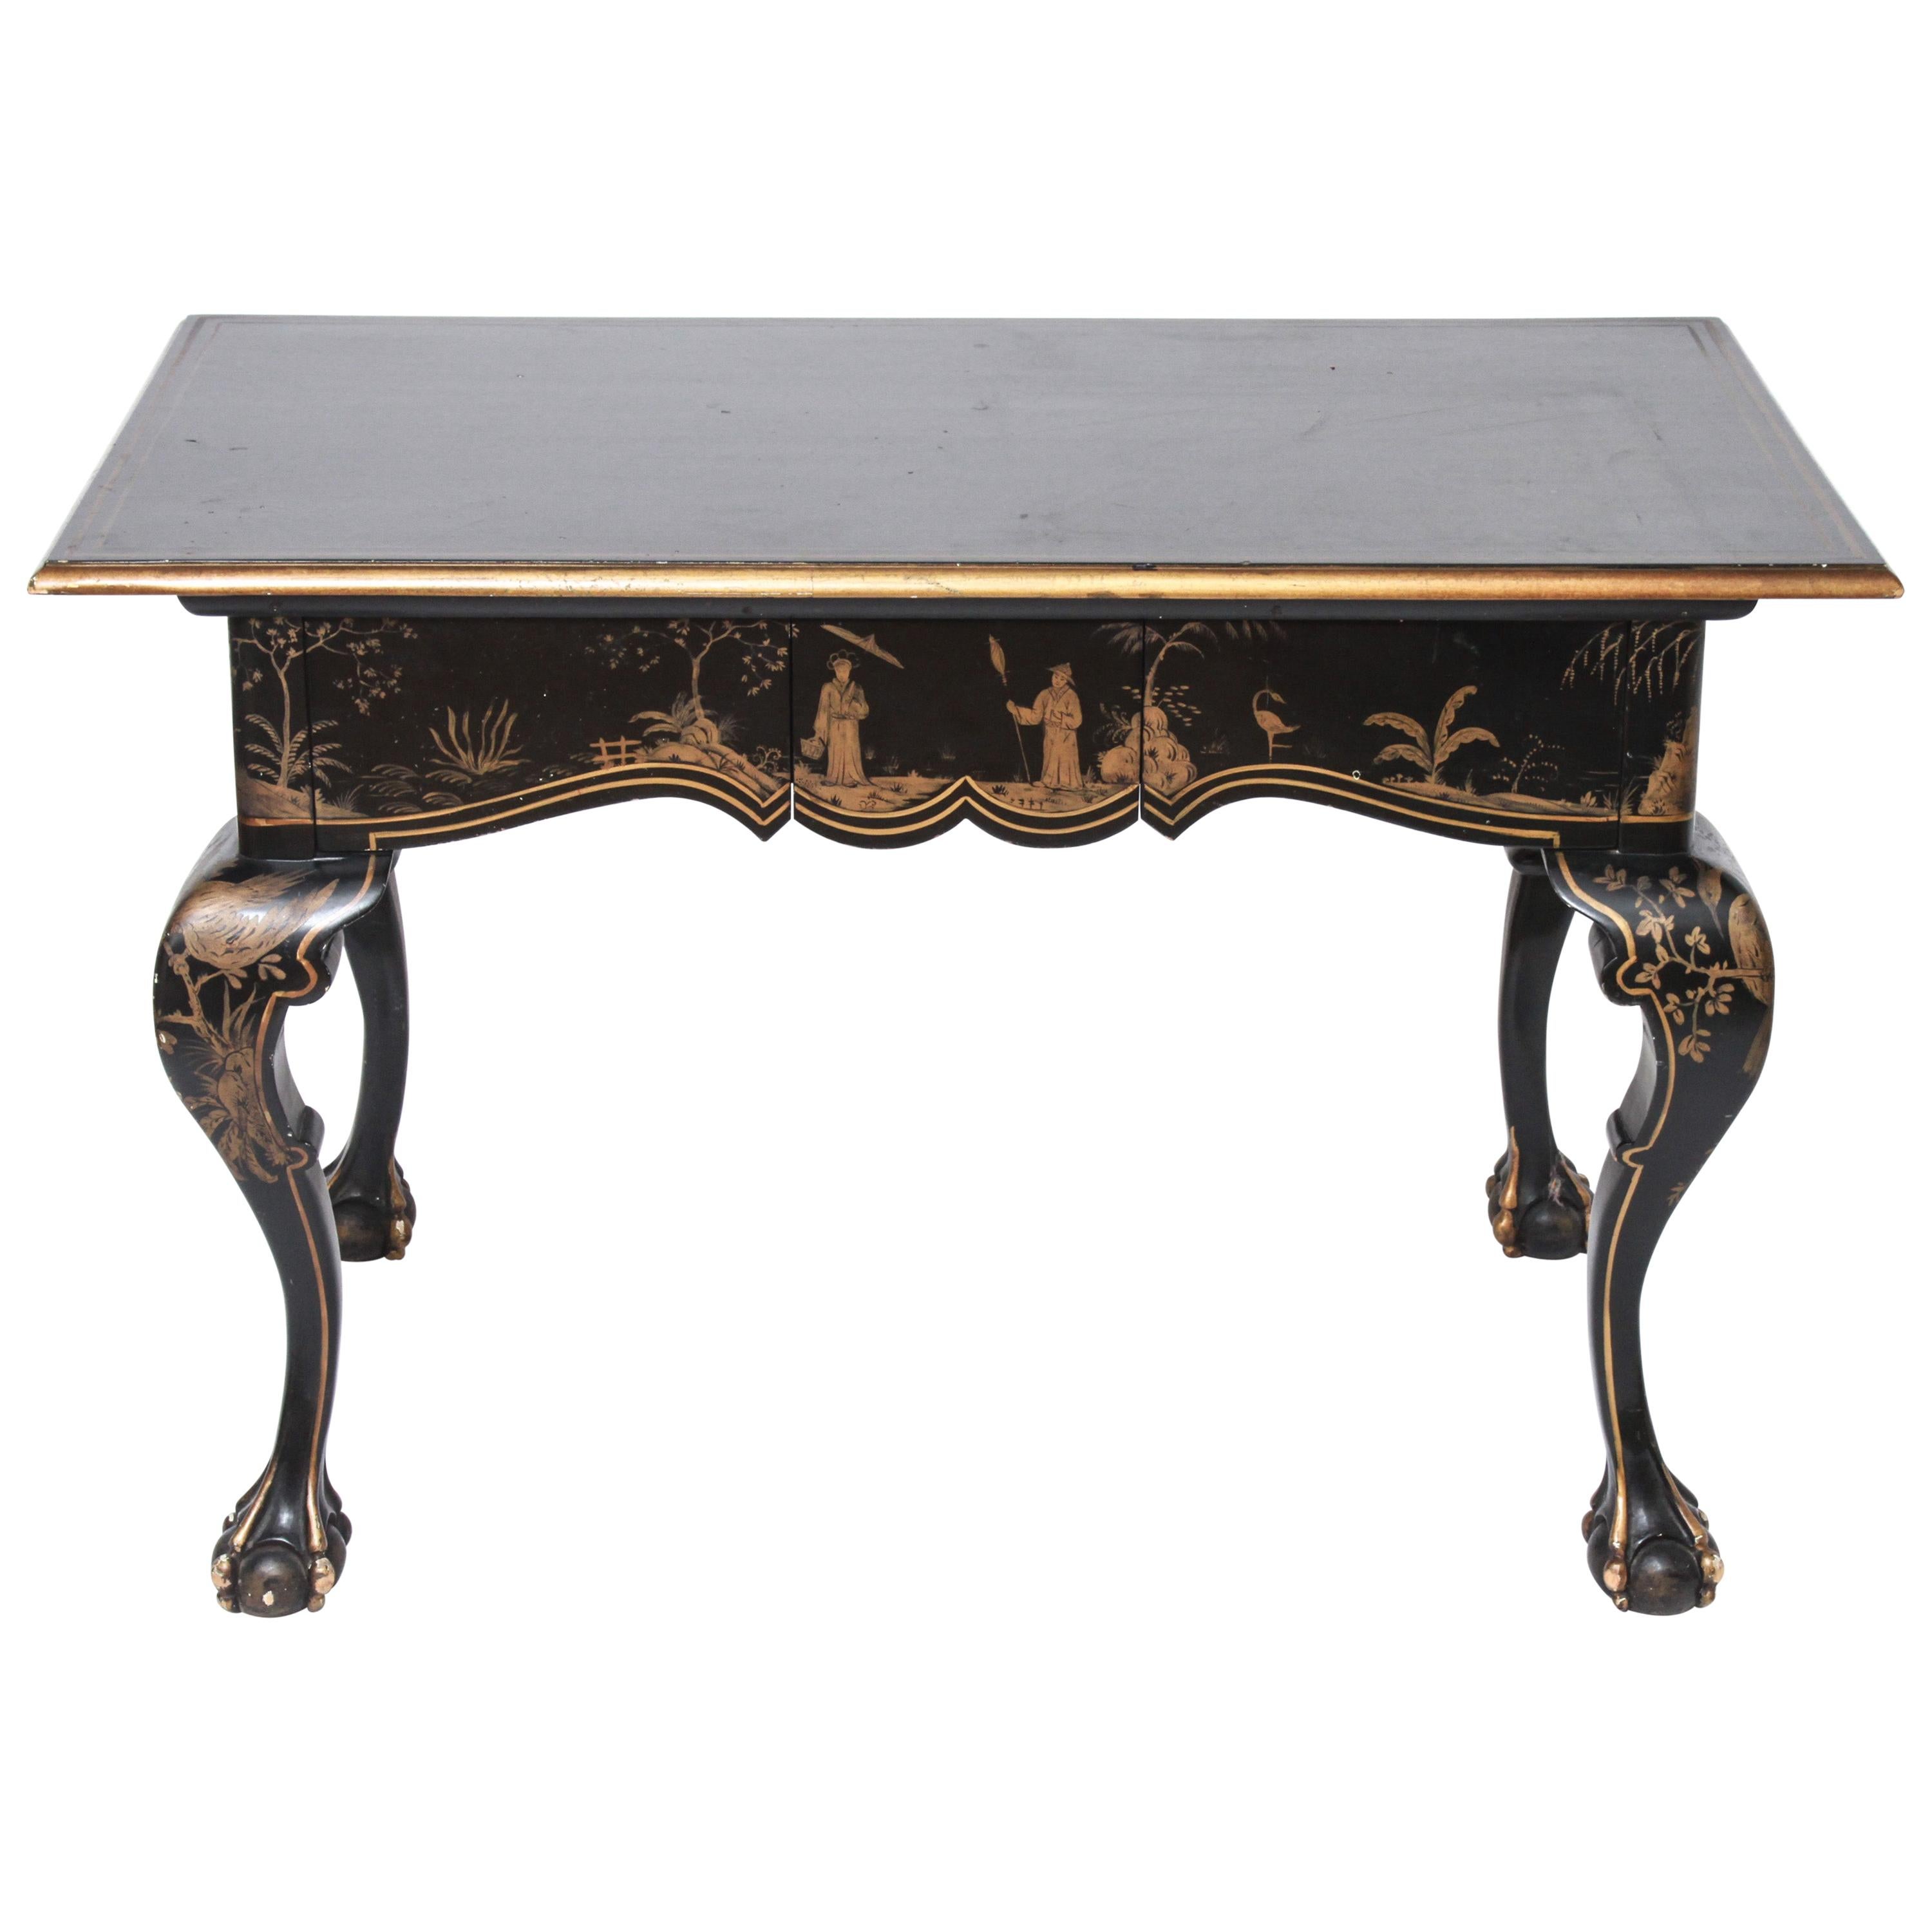 Chippendale Style Chinoiserie Lacquered Desk